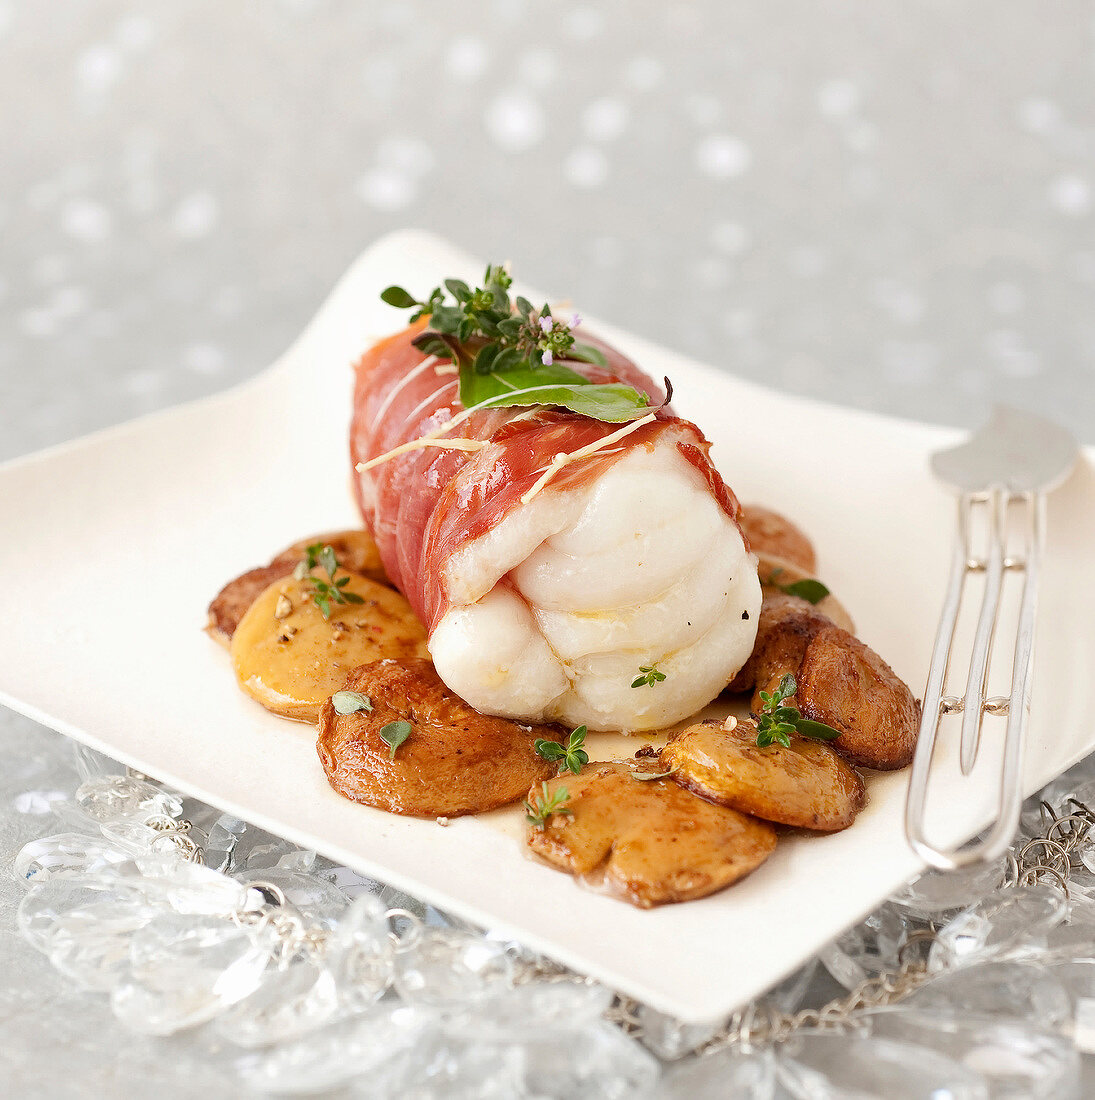 Roasted monkfish wrapped in bacon,pan-fried ceps